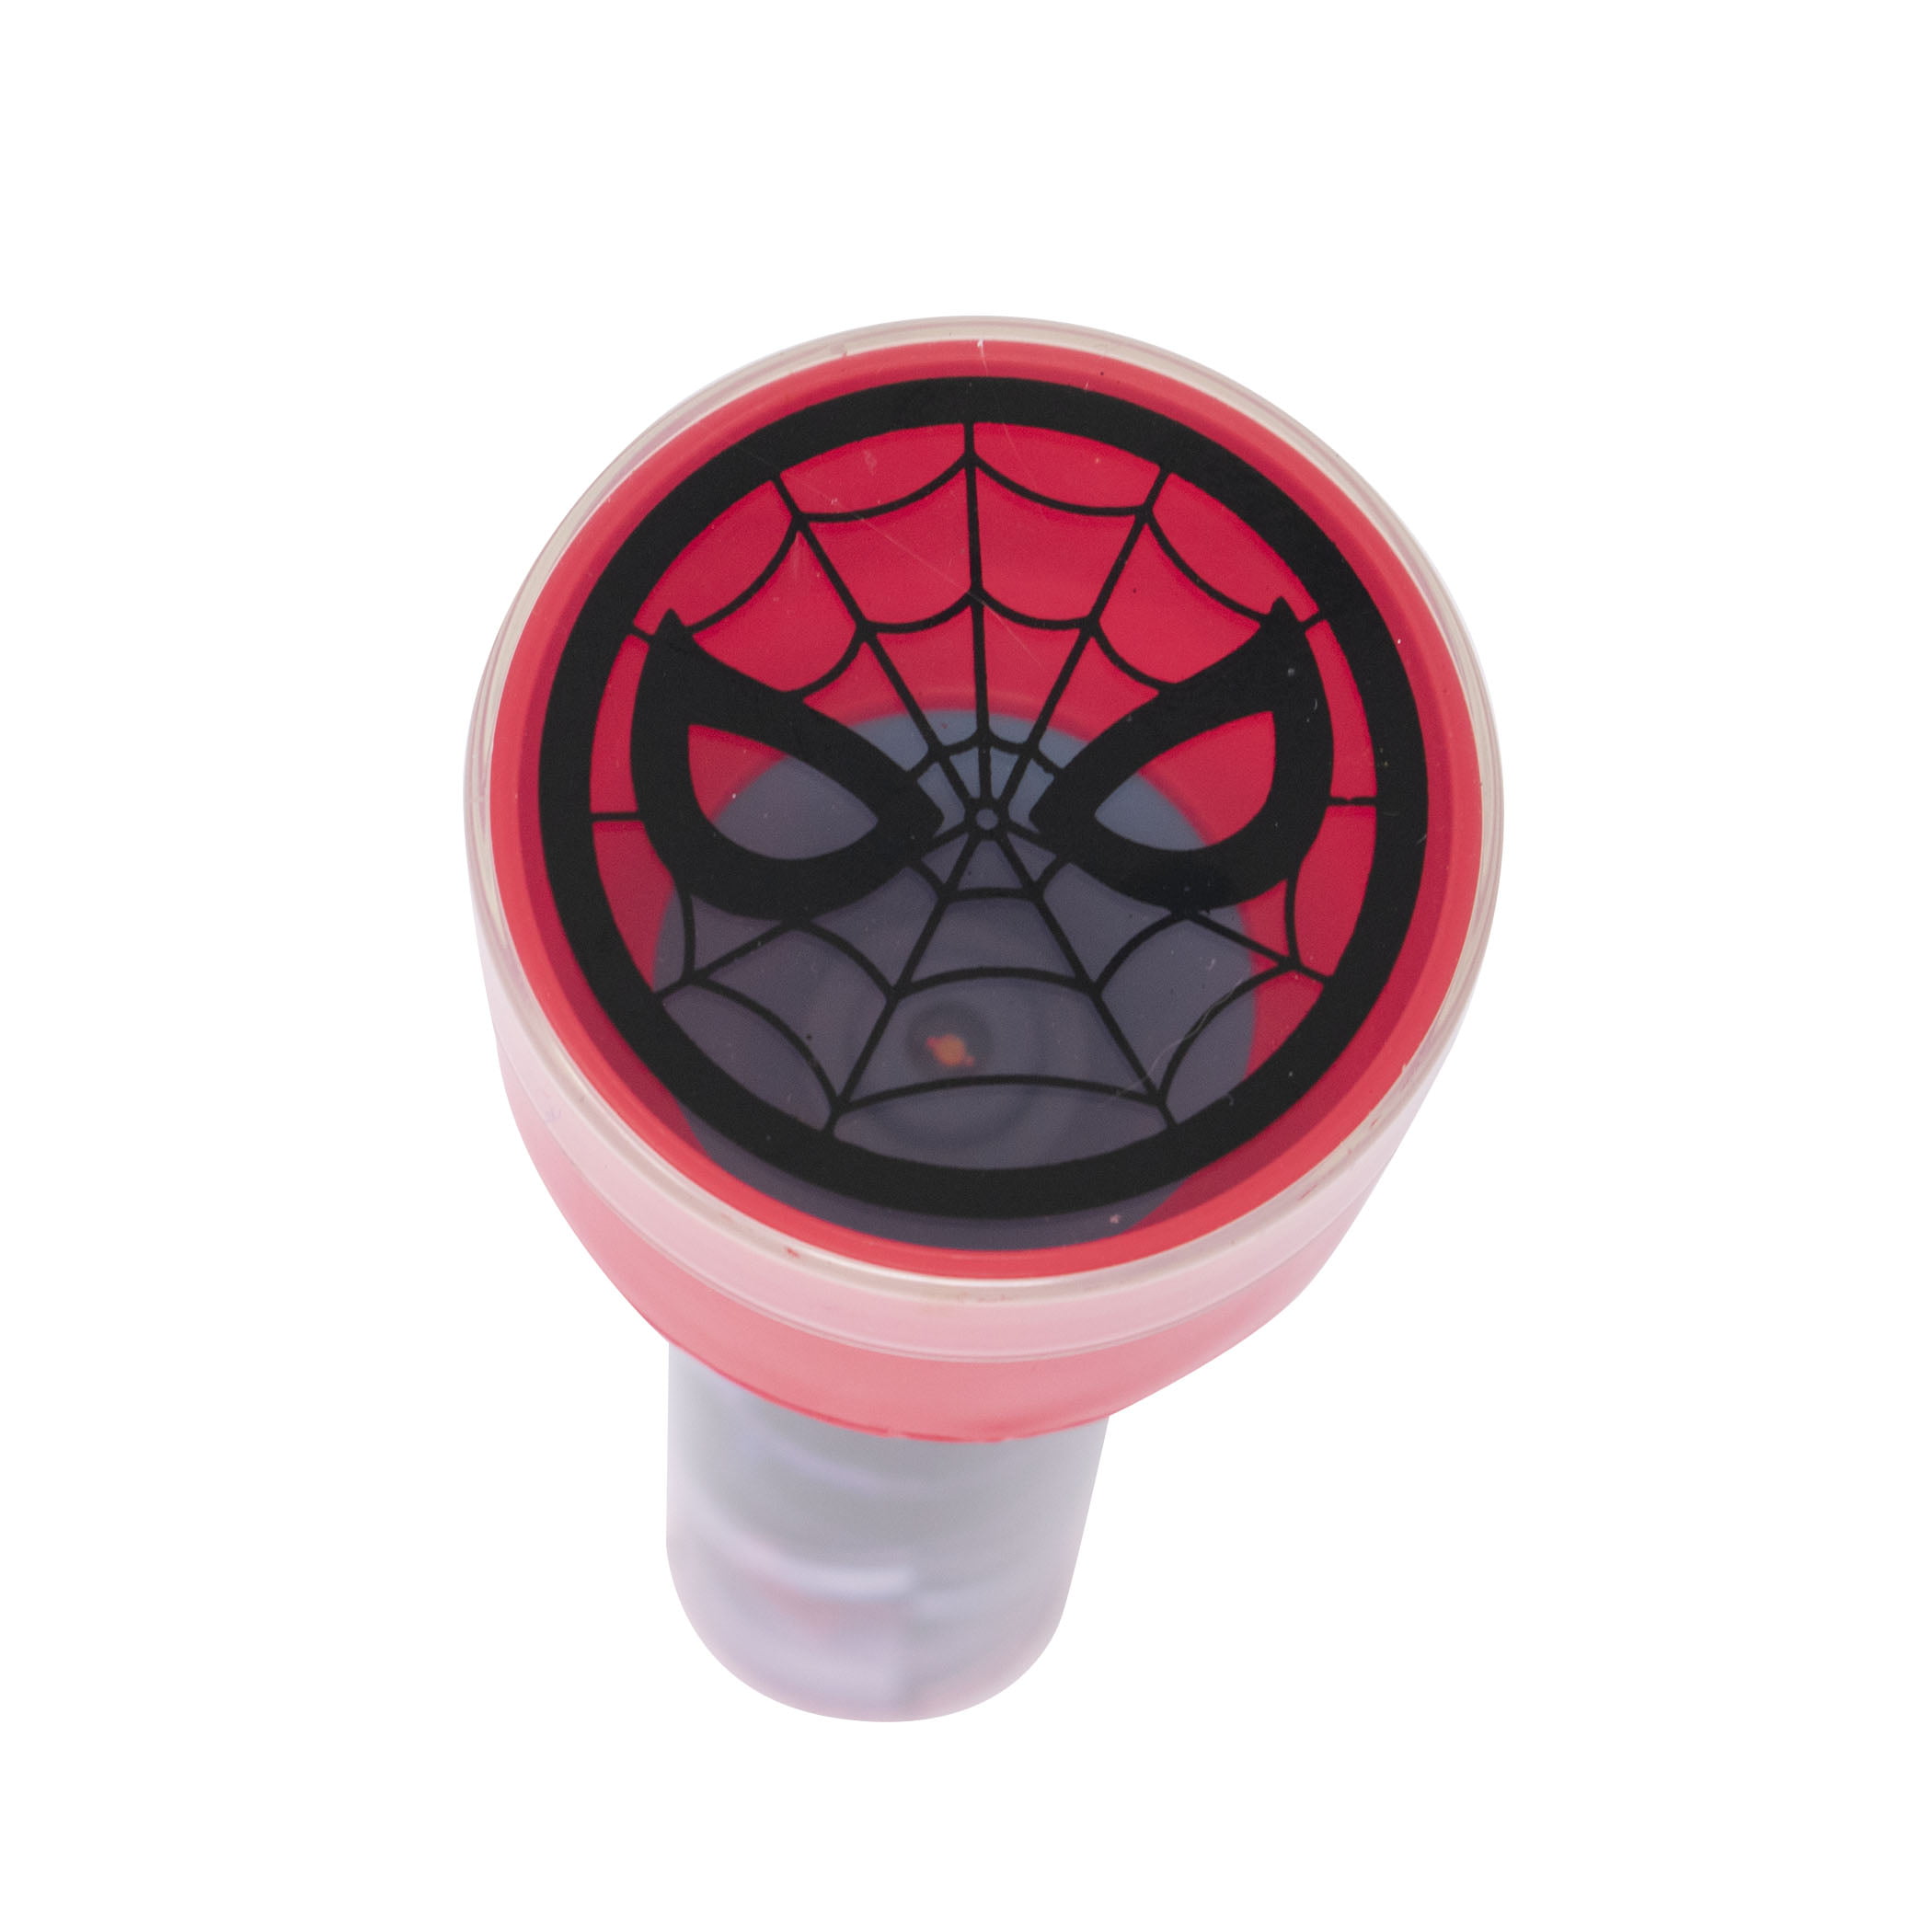 Spiderman Marvel Handheld Flashlight Projector Light with Character Lens Halloween Safety Trick or Treat Night Light or Play